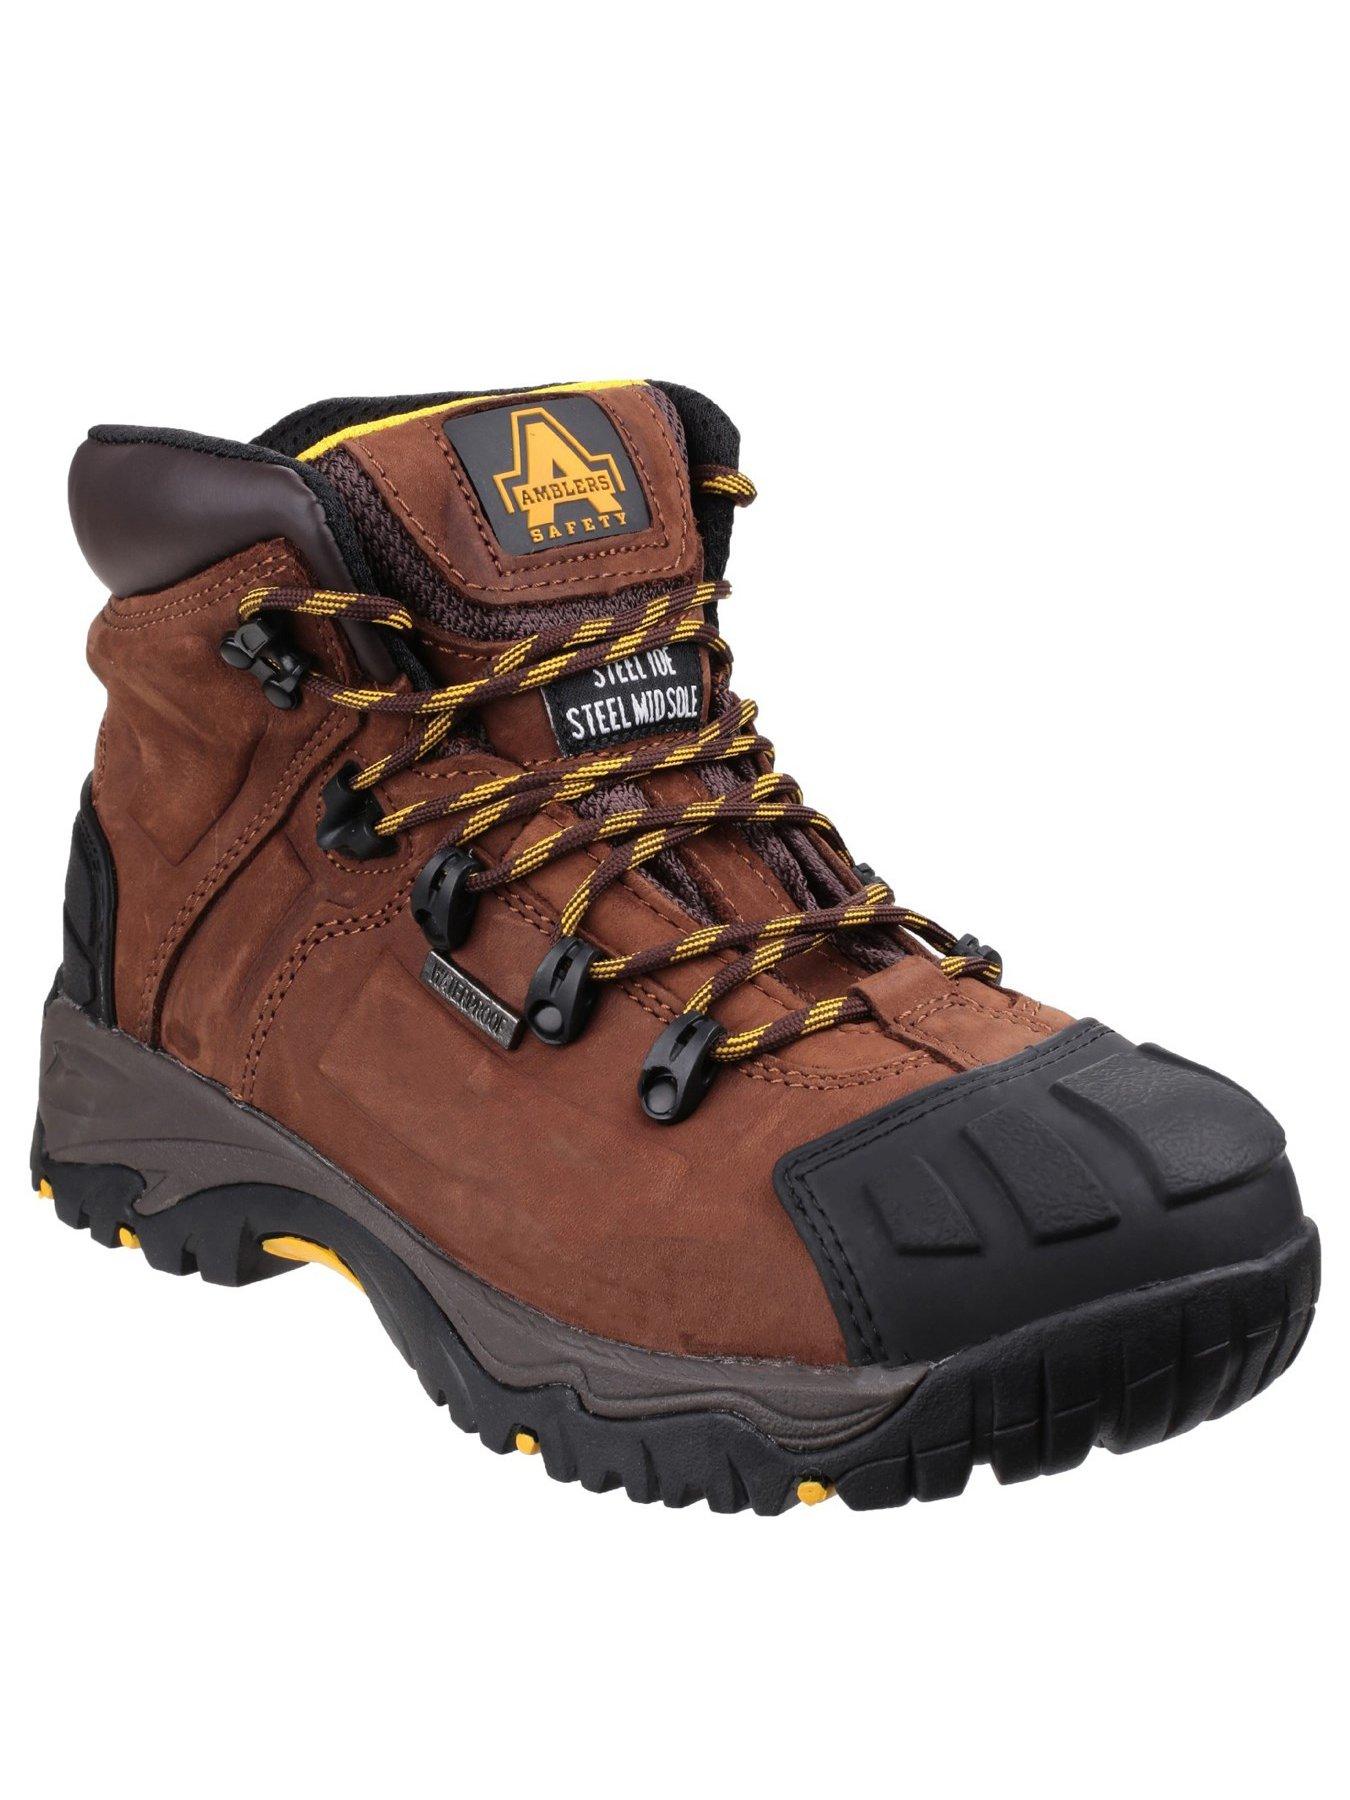 Shoes & boots Safety Fs39 Boots - Brown